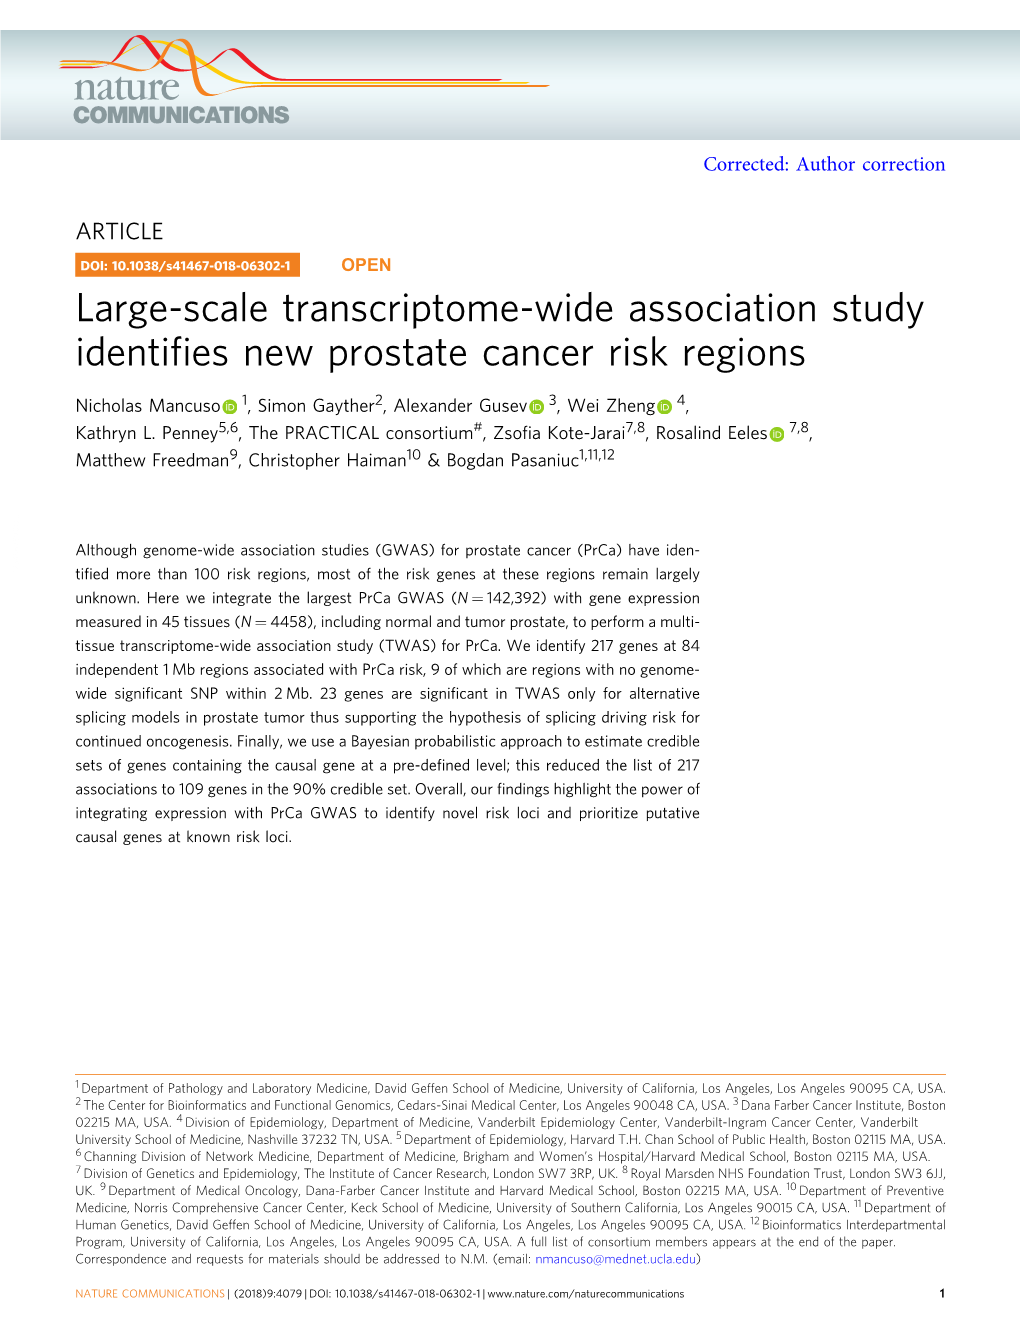 Large-Scale Transcriptome-Wide Association Study Identifies New Prostate Cancer Risk Regions